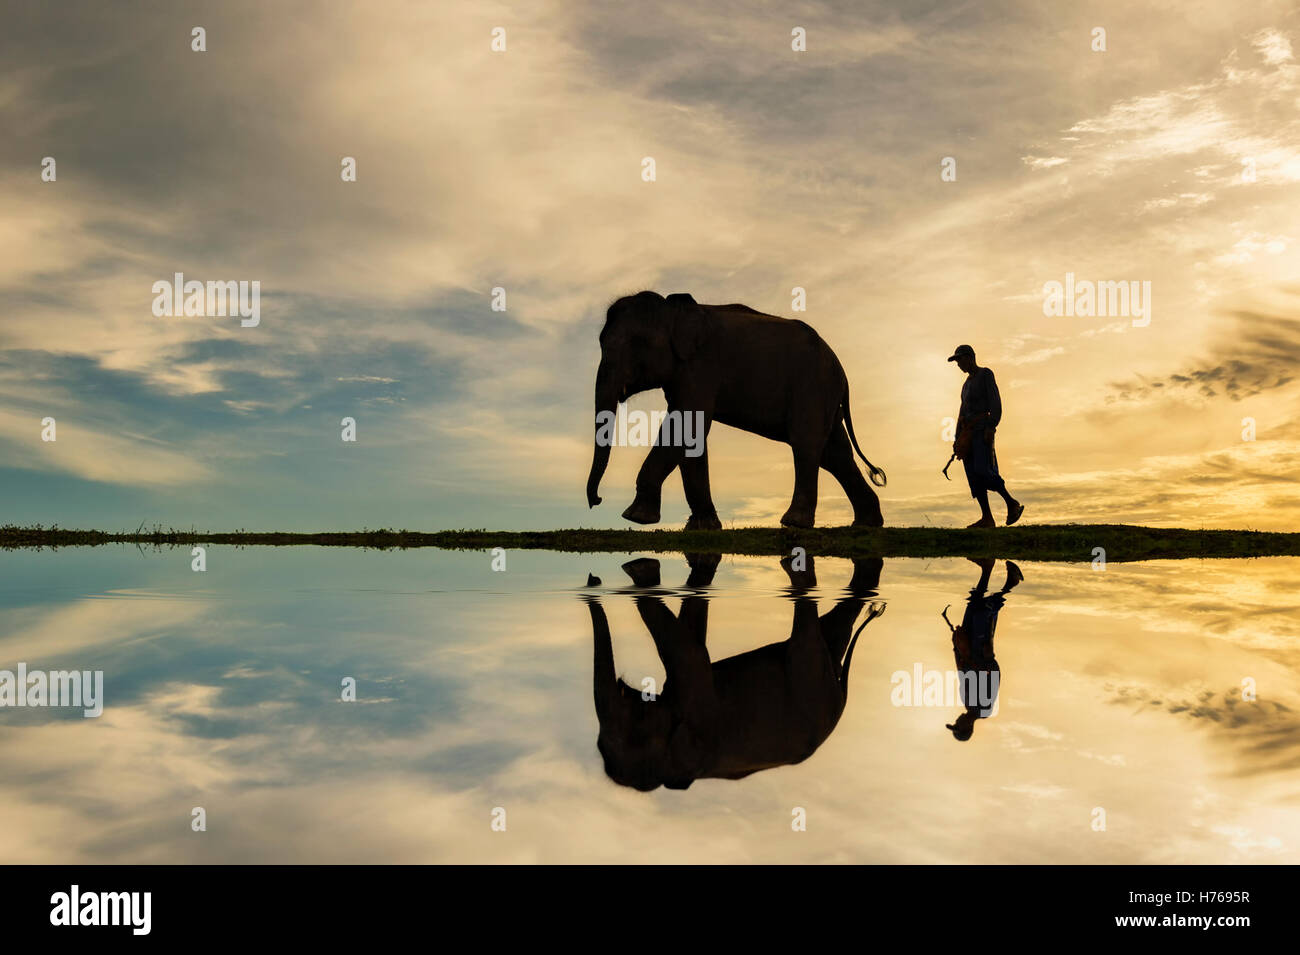 Silhouette of a mahout man walking with his elephant, Thailand Stock Photo